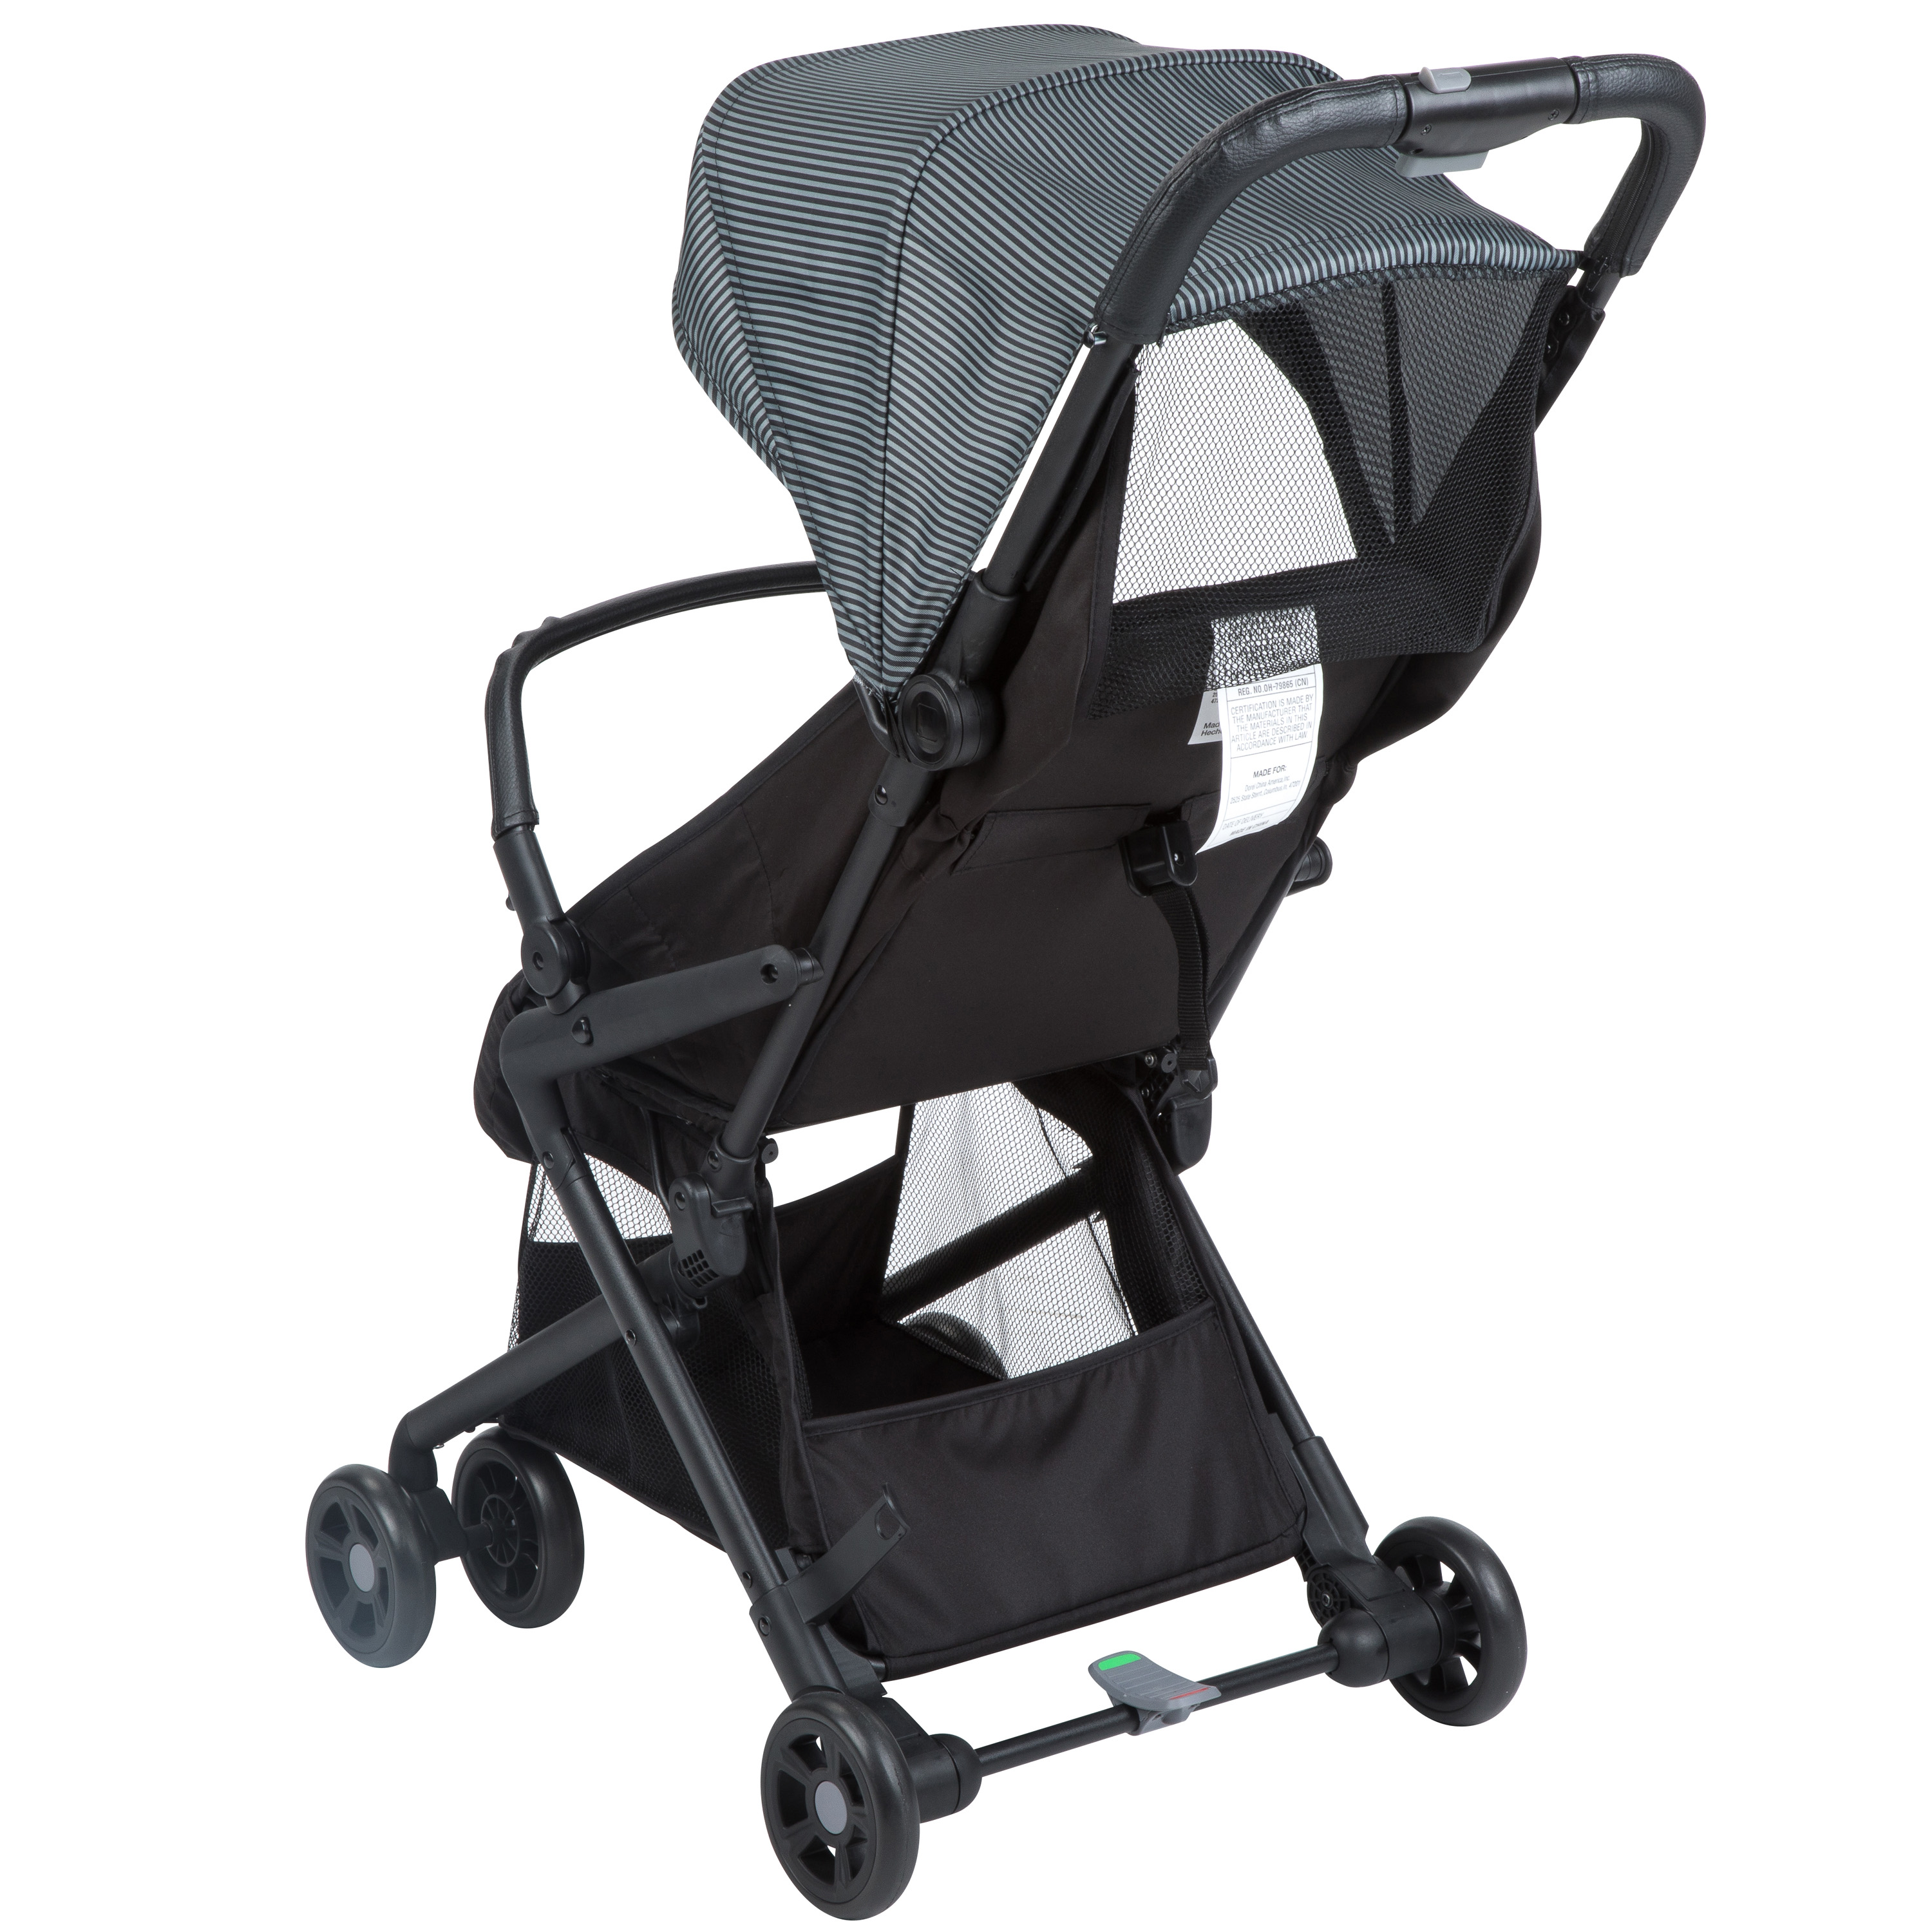 Monbebe Cube Compact Stroller, Gray and Black Pinstripe - image 3 of 10